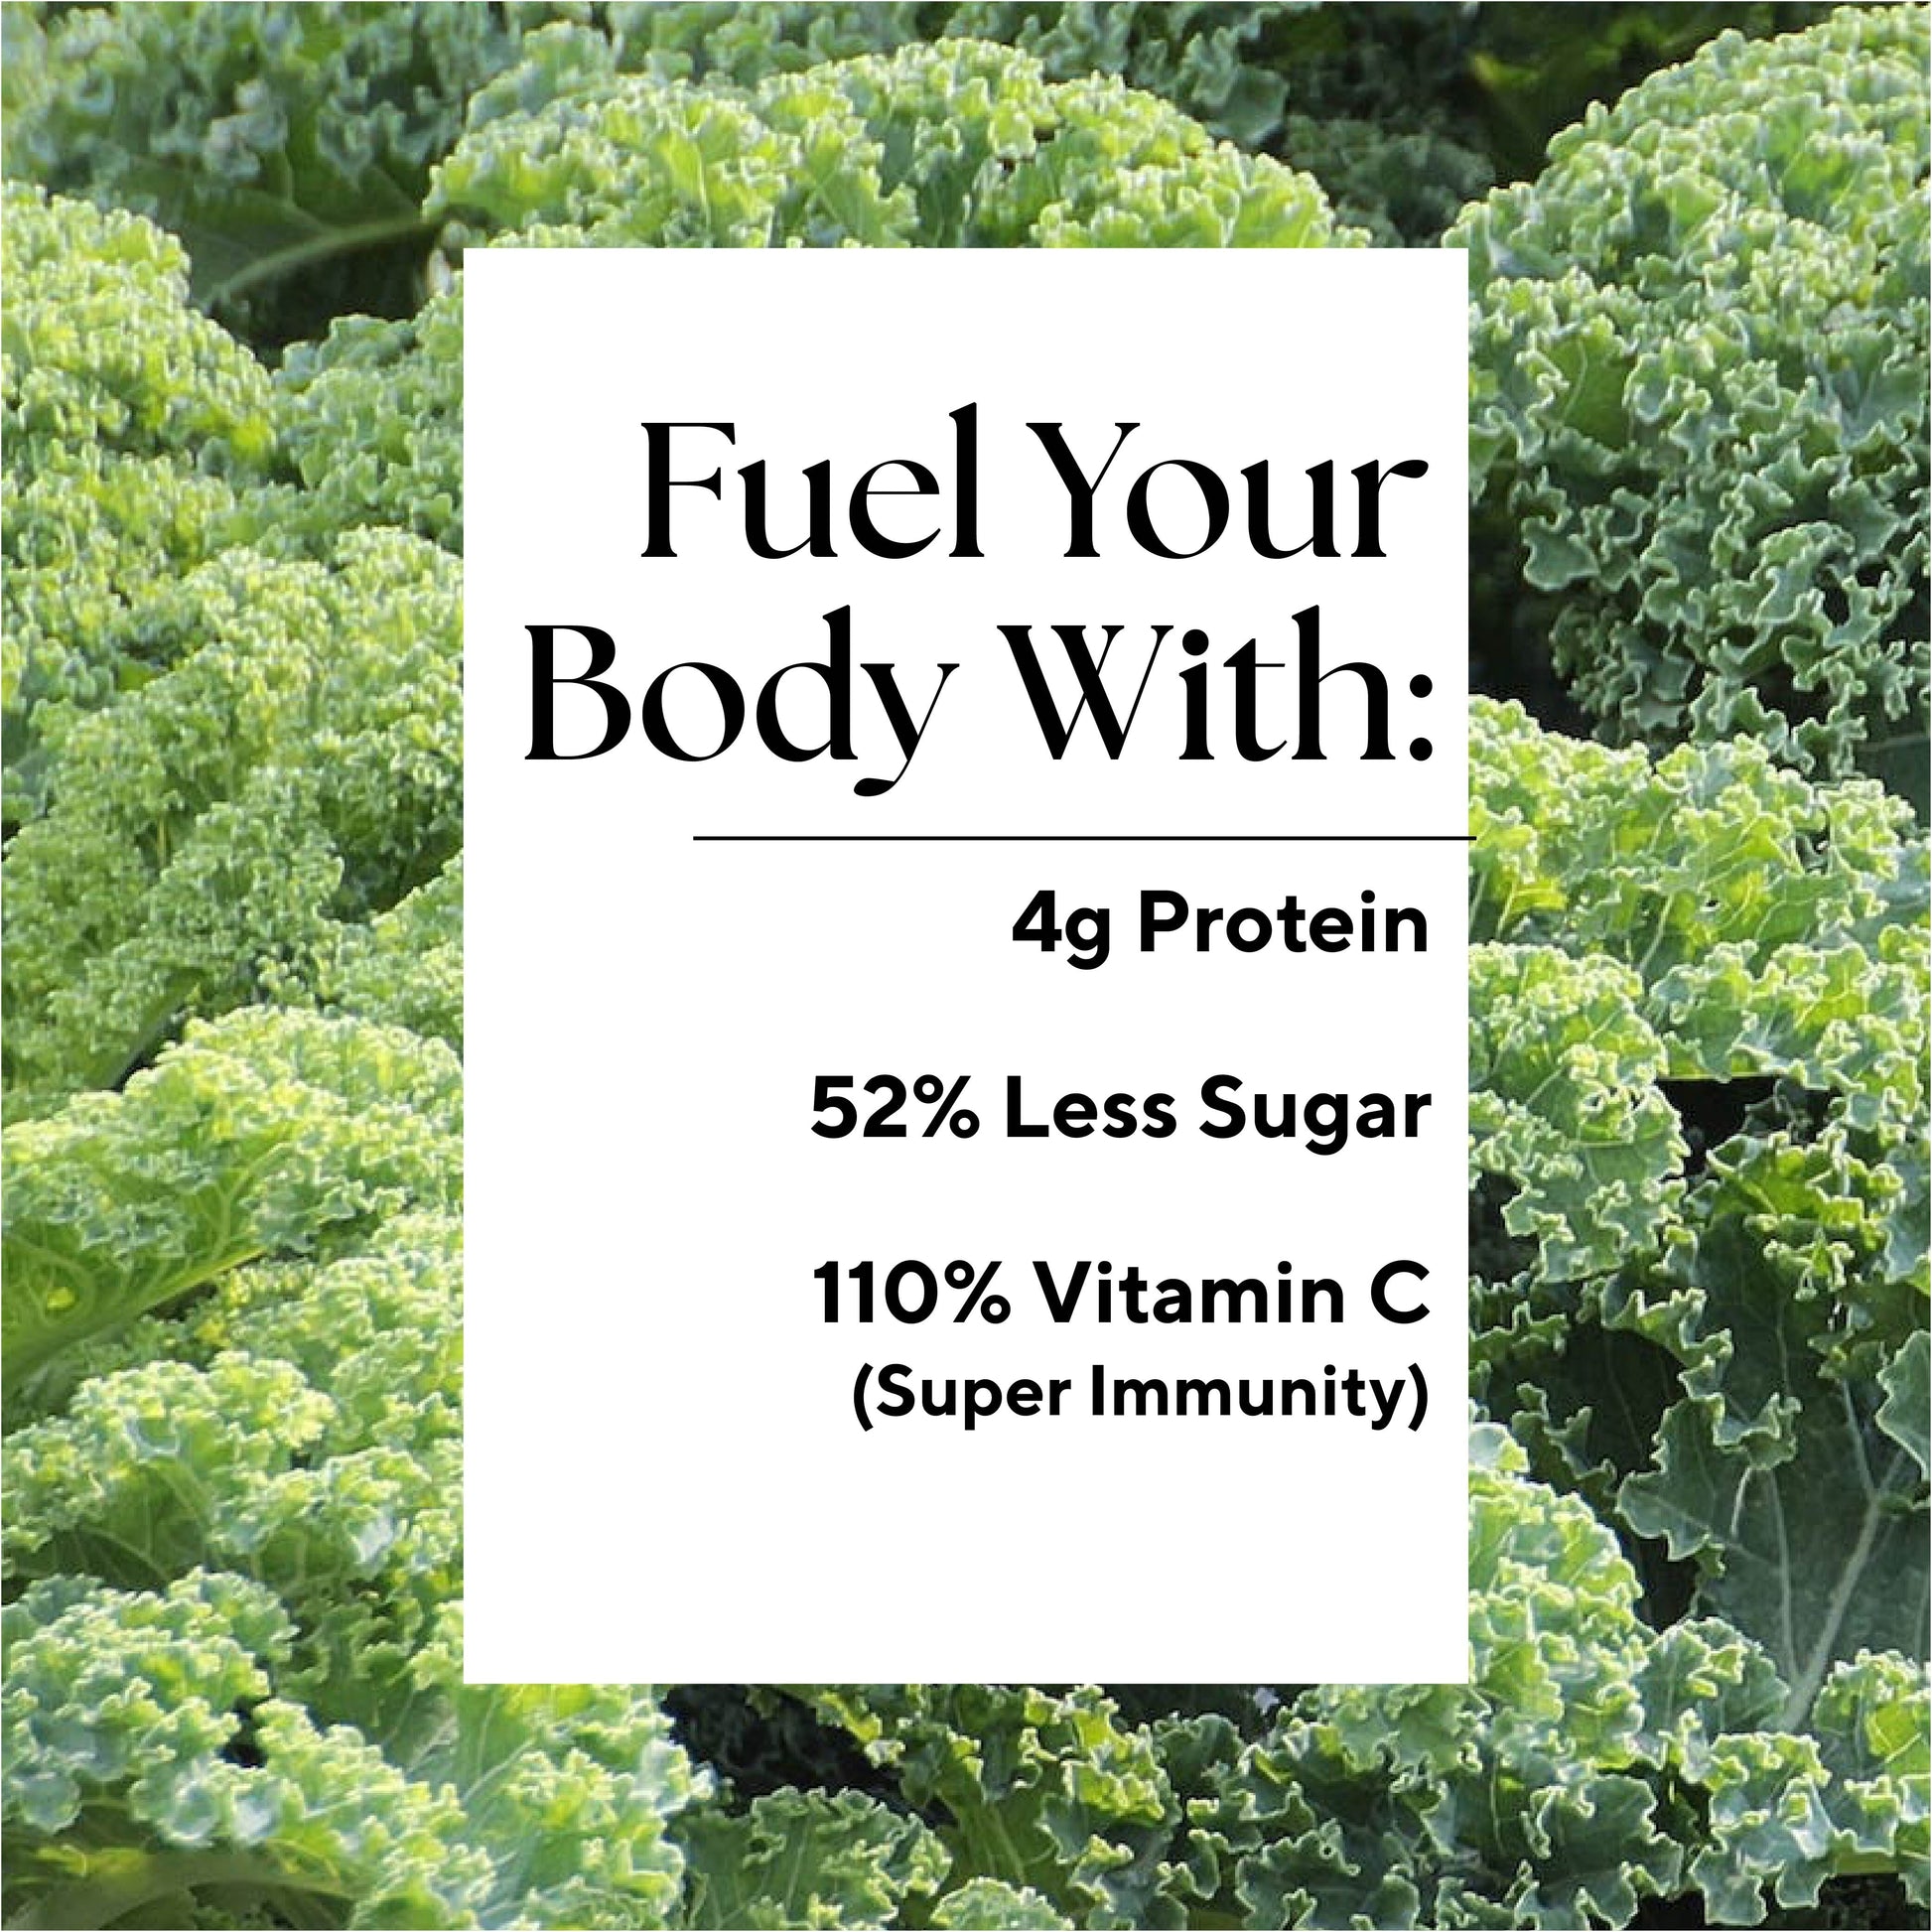 Infographic that reads: "Fuel your body with: 4g Protein, 52% Less sugar, and 110% Vitamin C (Super Immunity)"